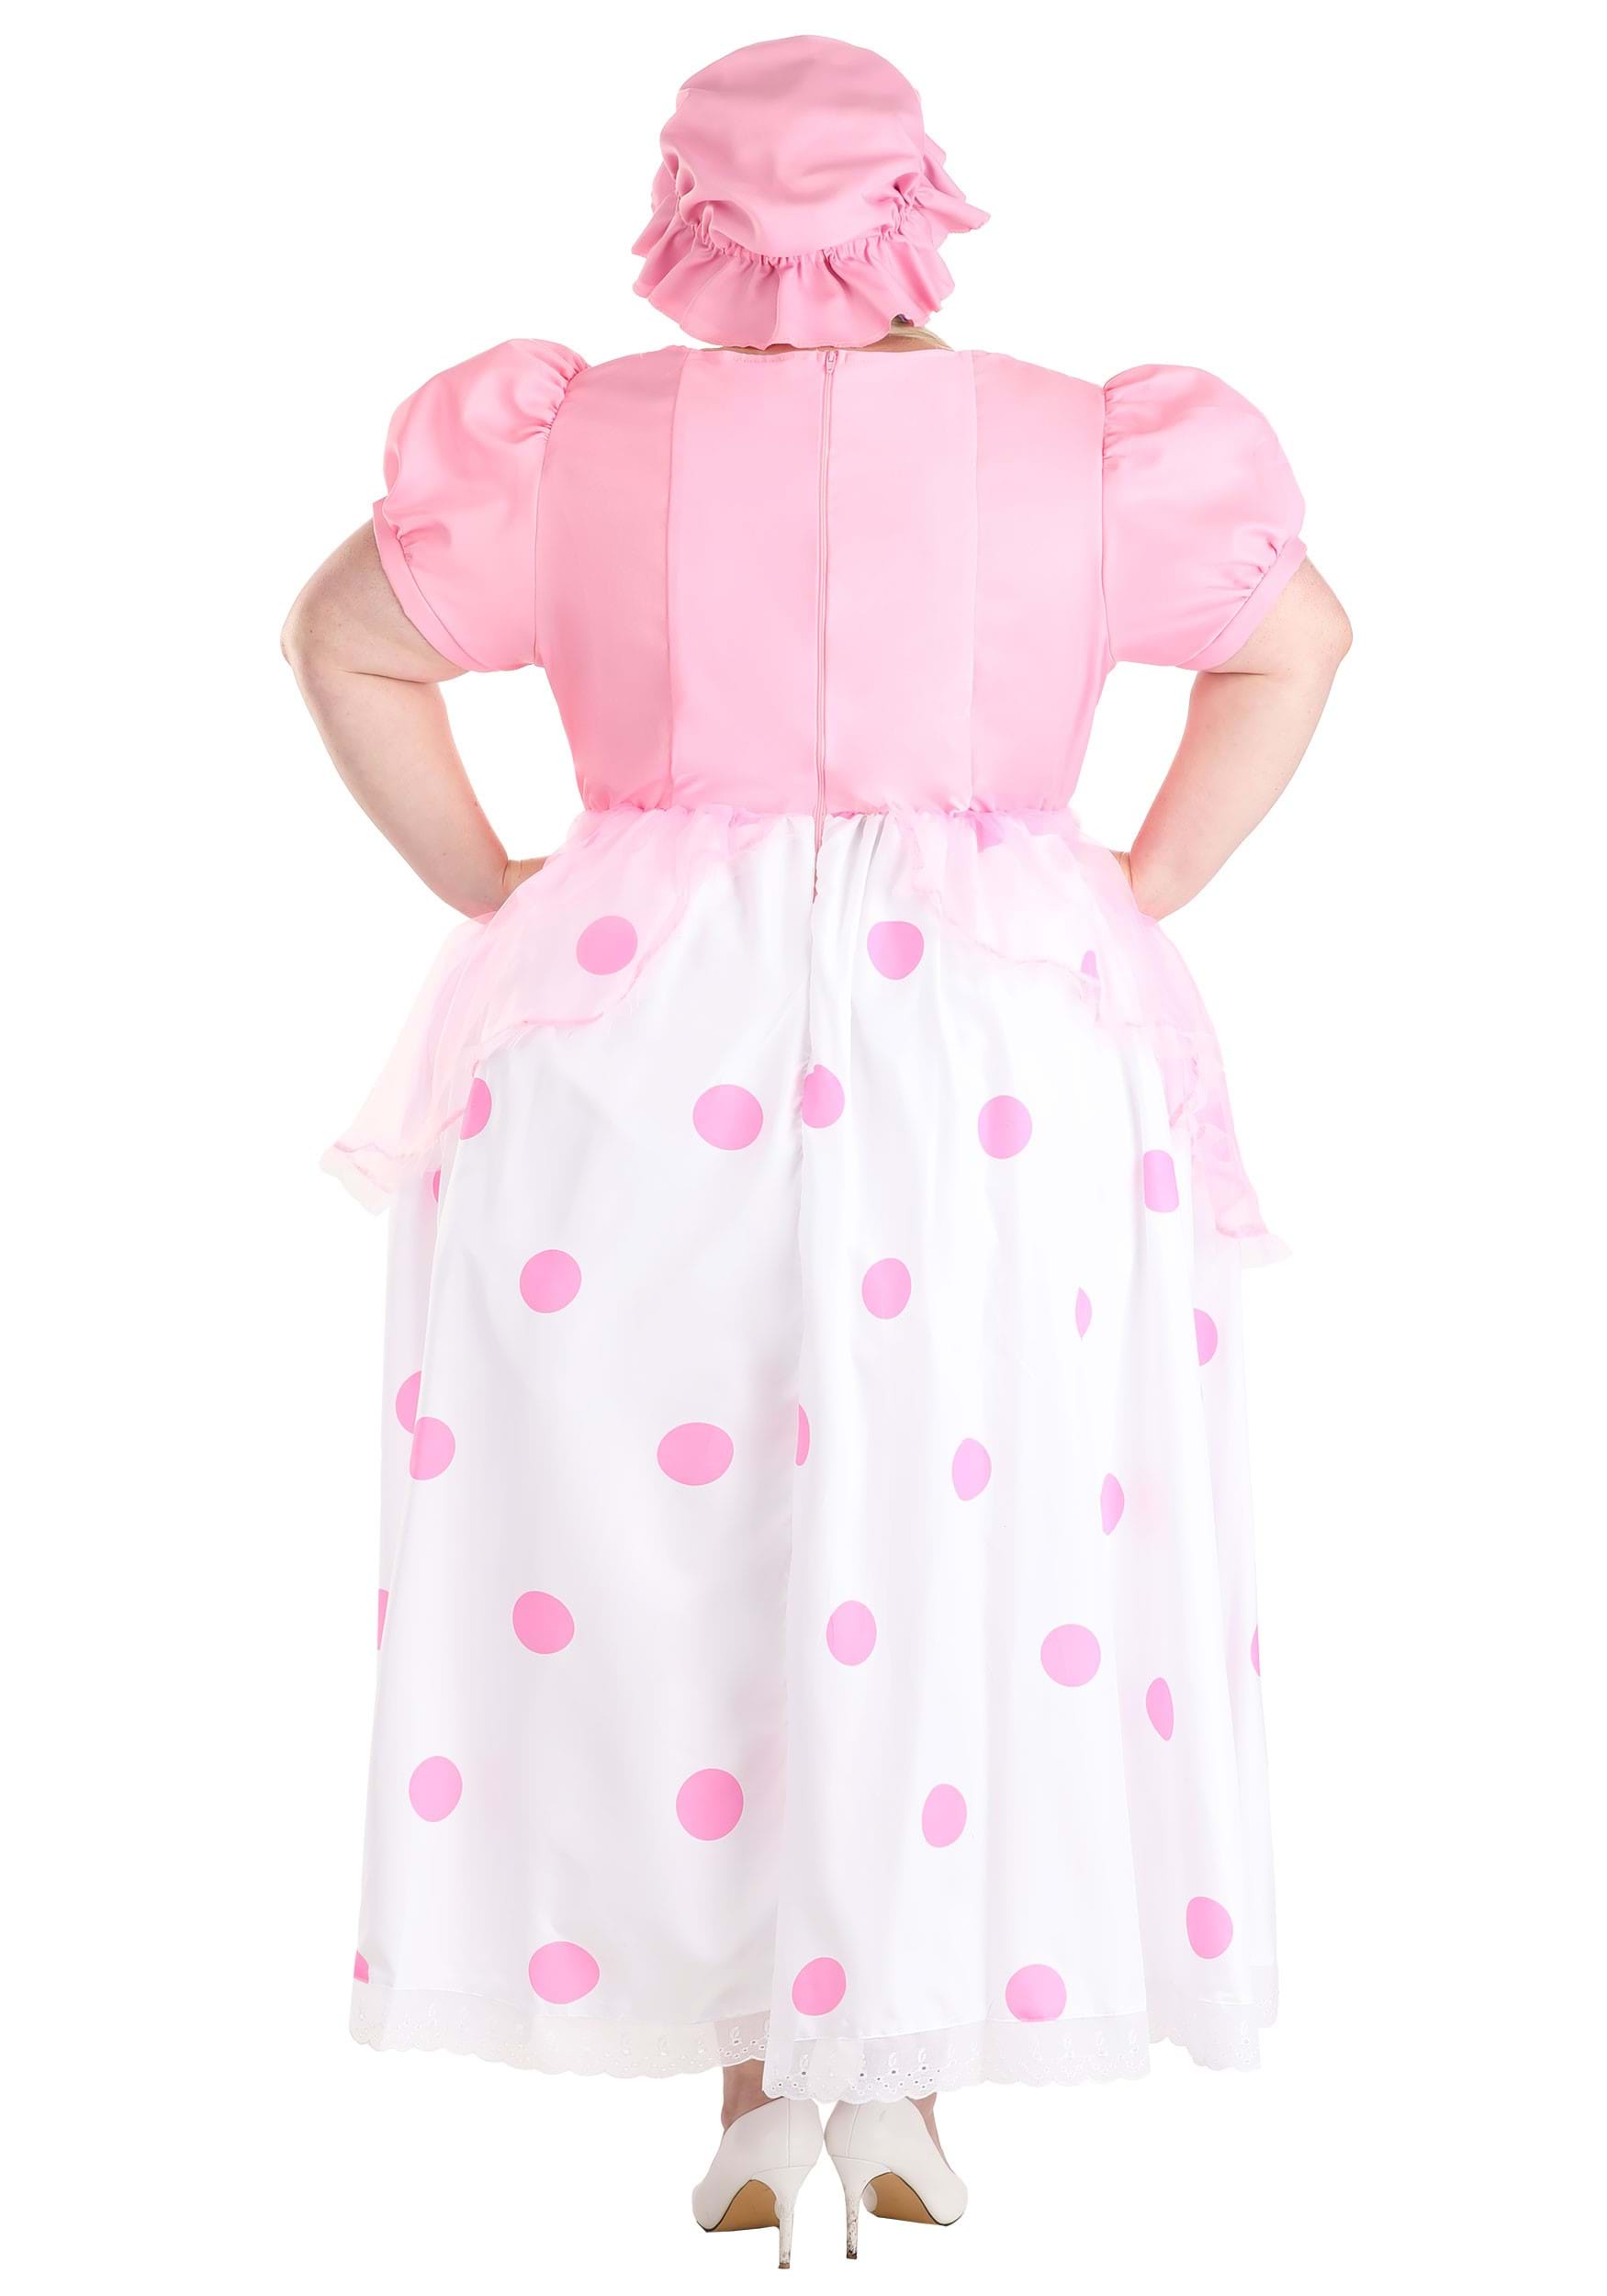 Bo Peep Plus Size Costume For Women , Storybook Costumes